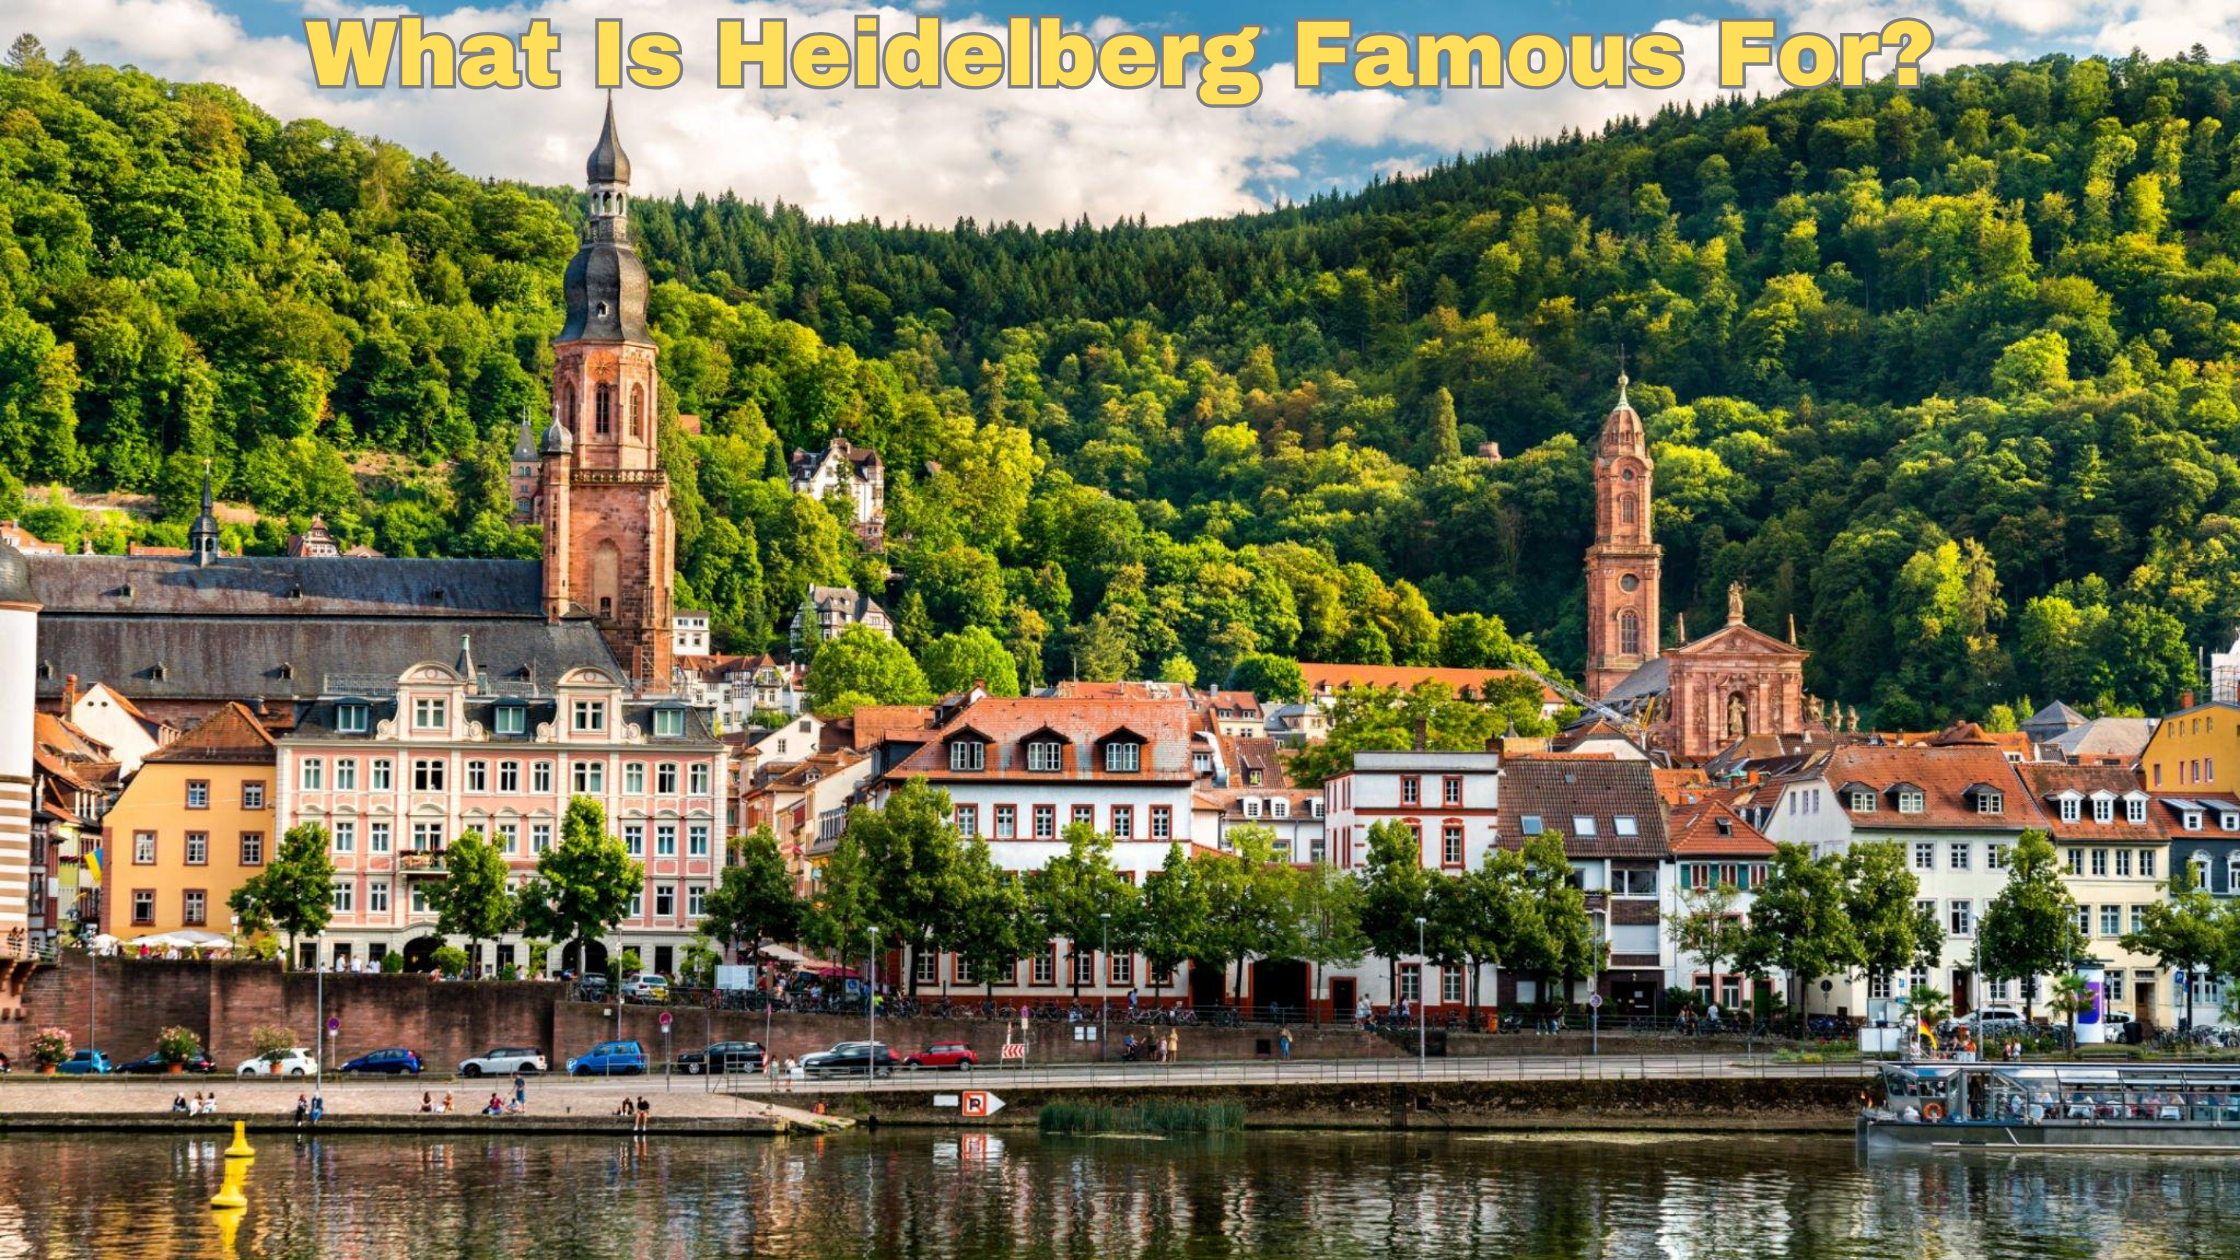 What Is Heidelberg Famous For